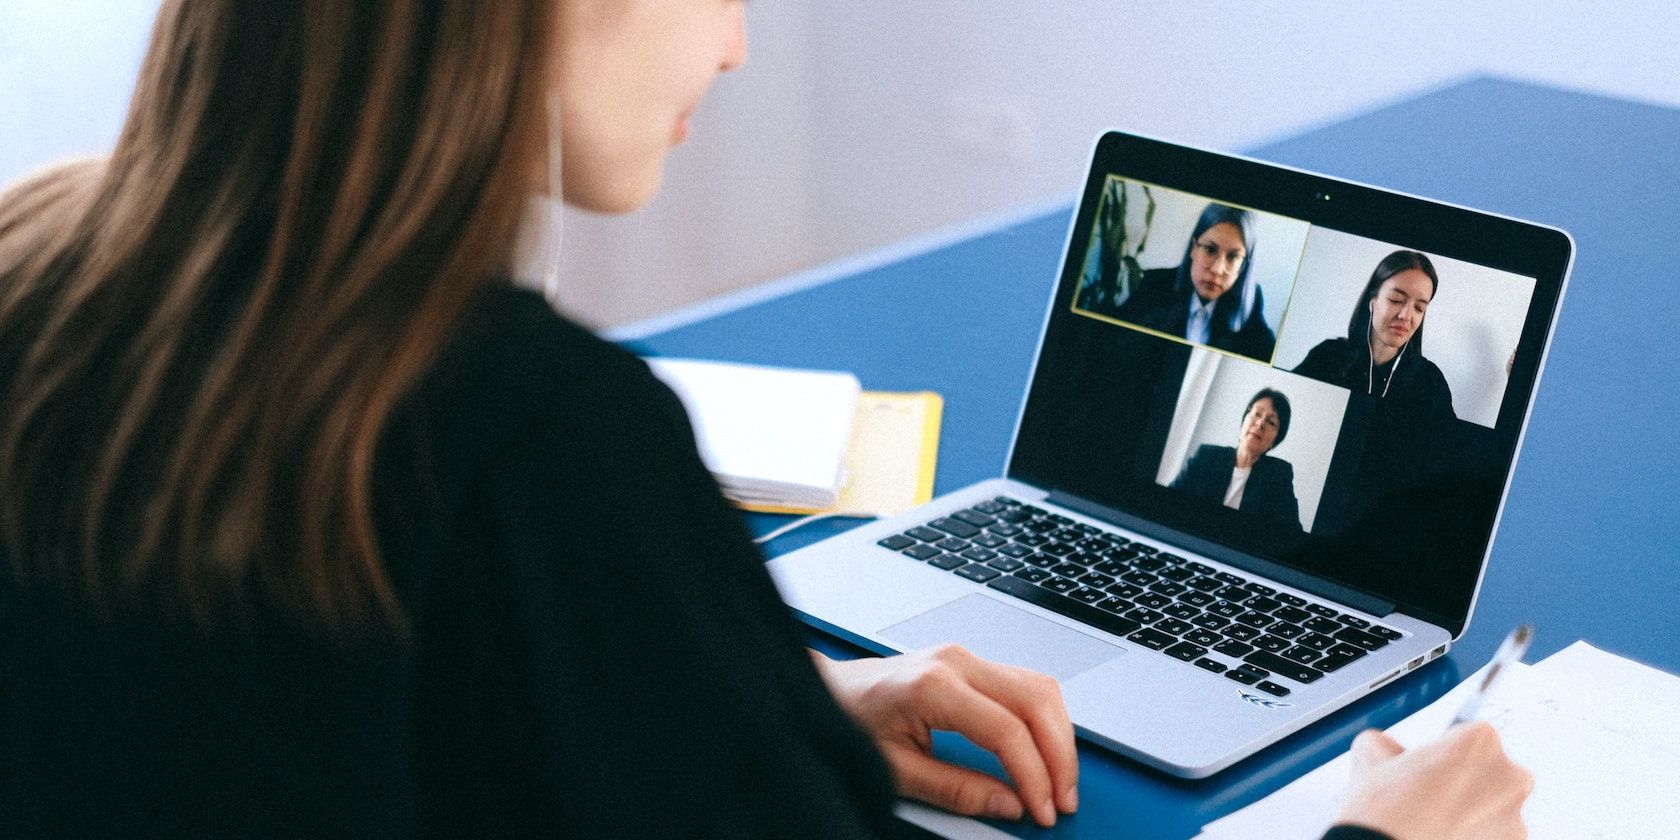 Video calling on a laptop